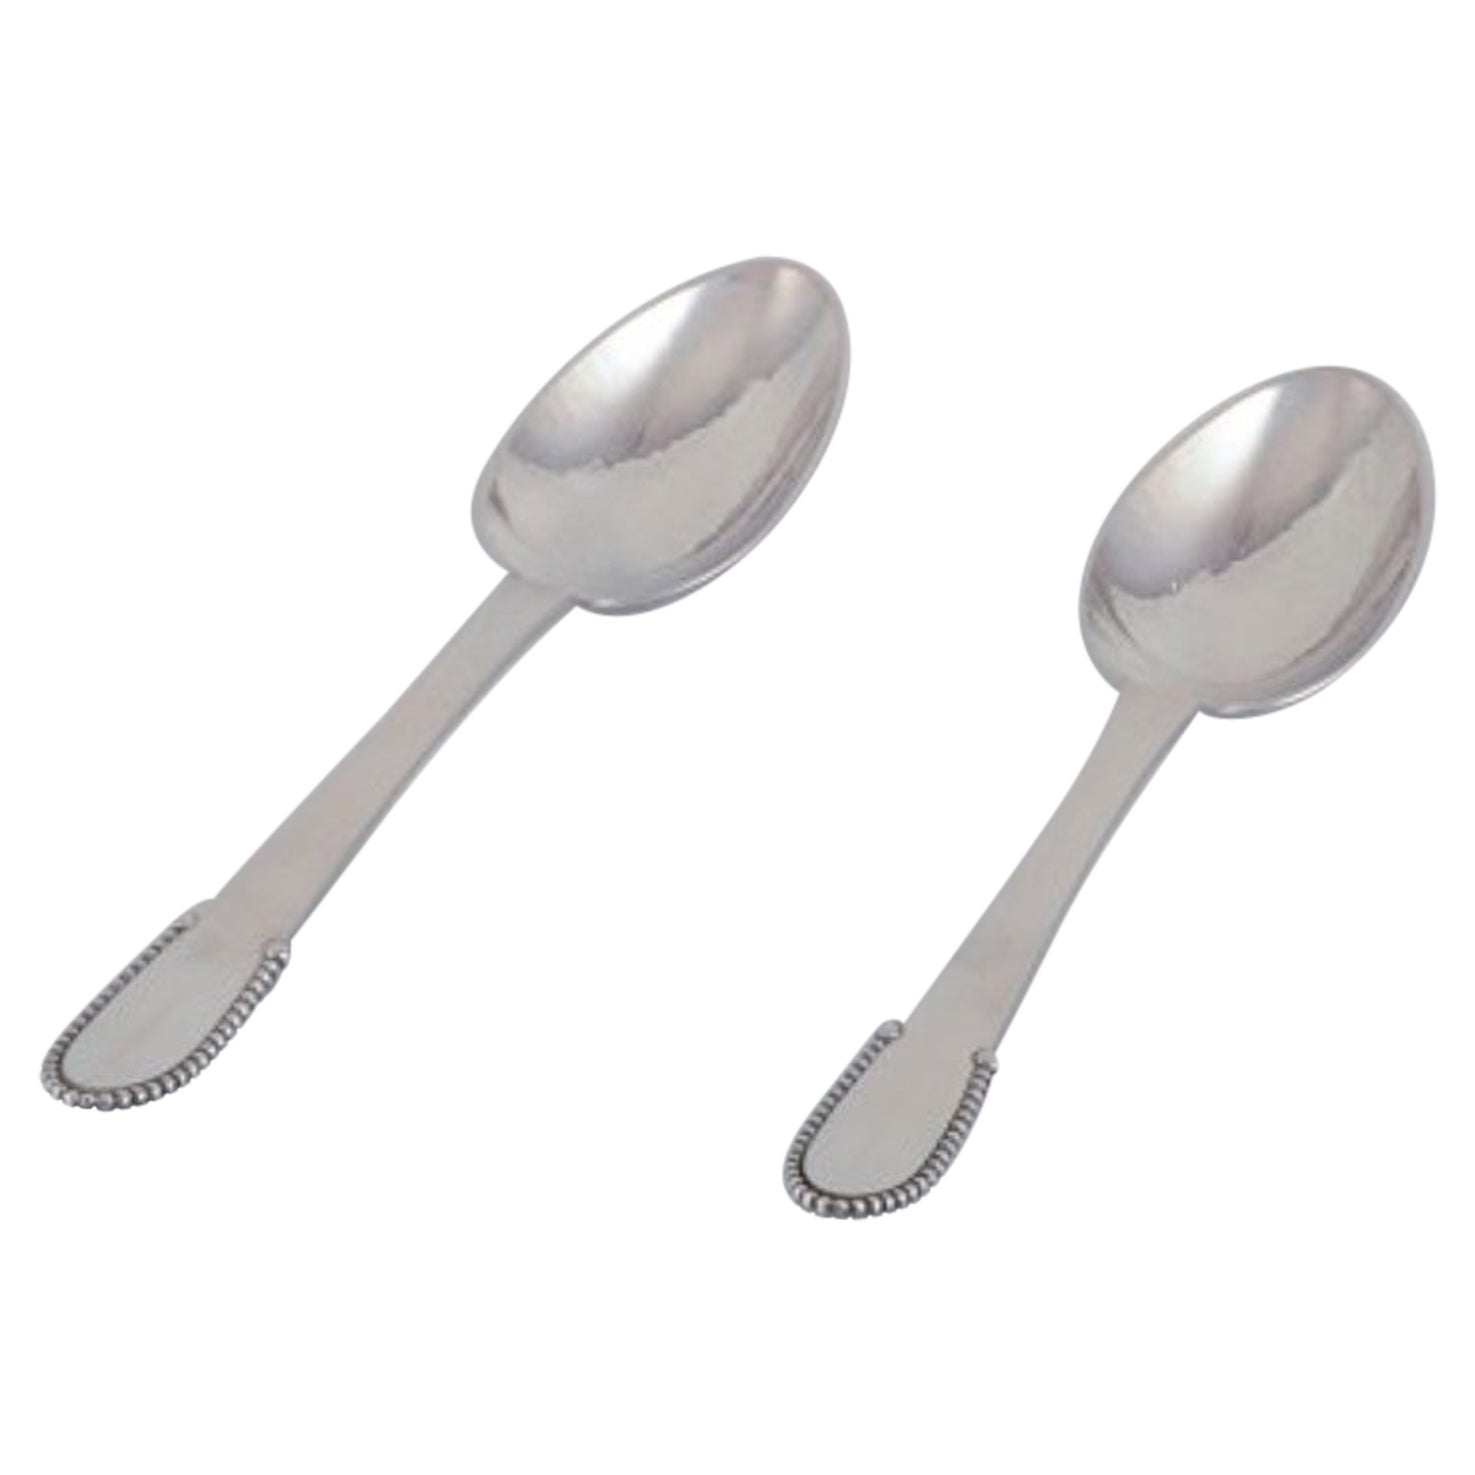 Georg Jensen. Two Beaded tablespoons in 830 silver. Dated 1930.